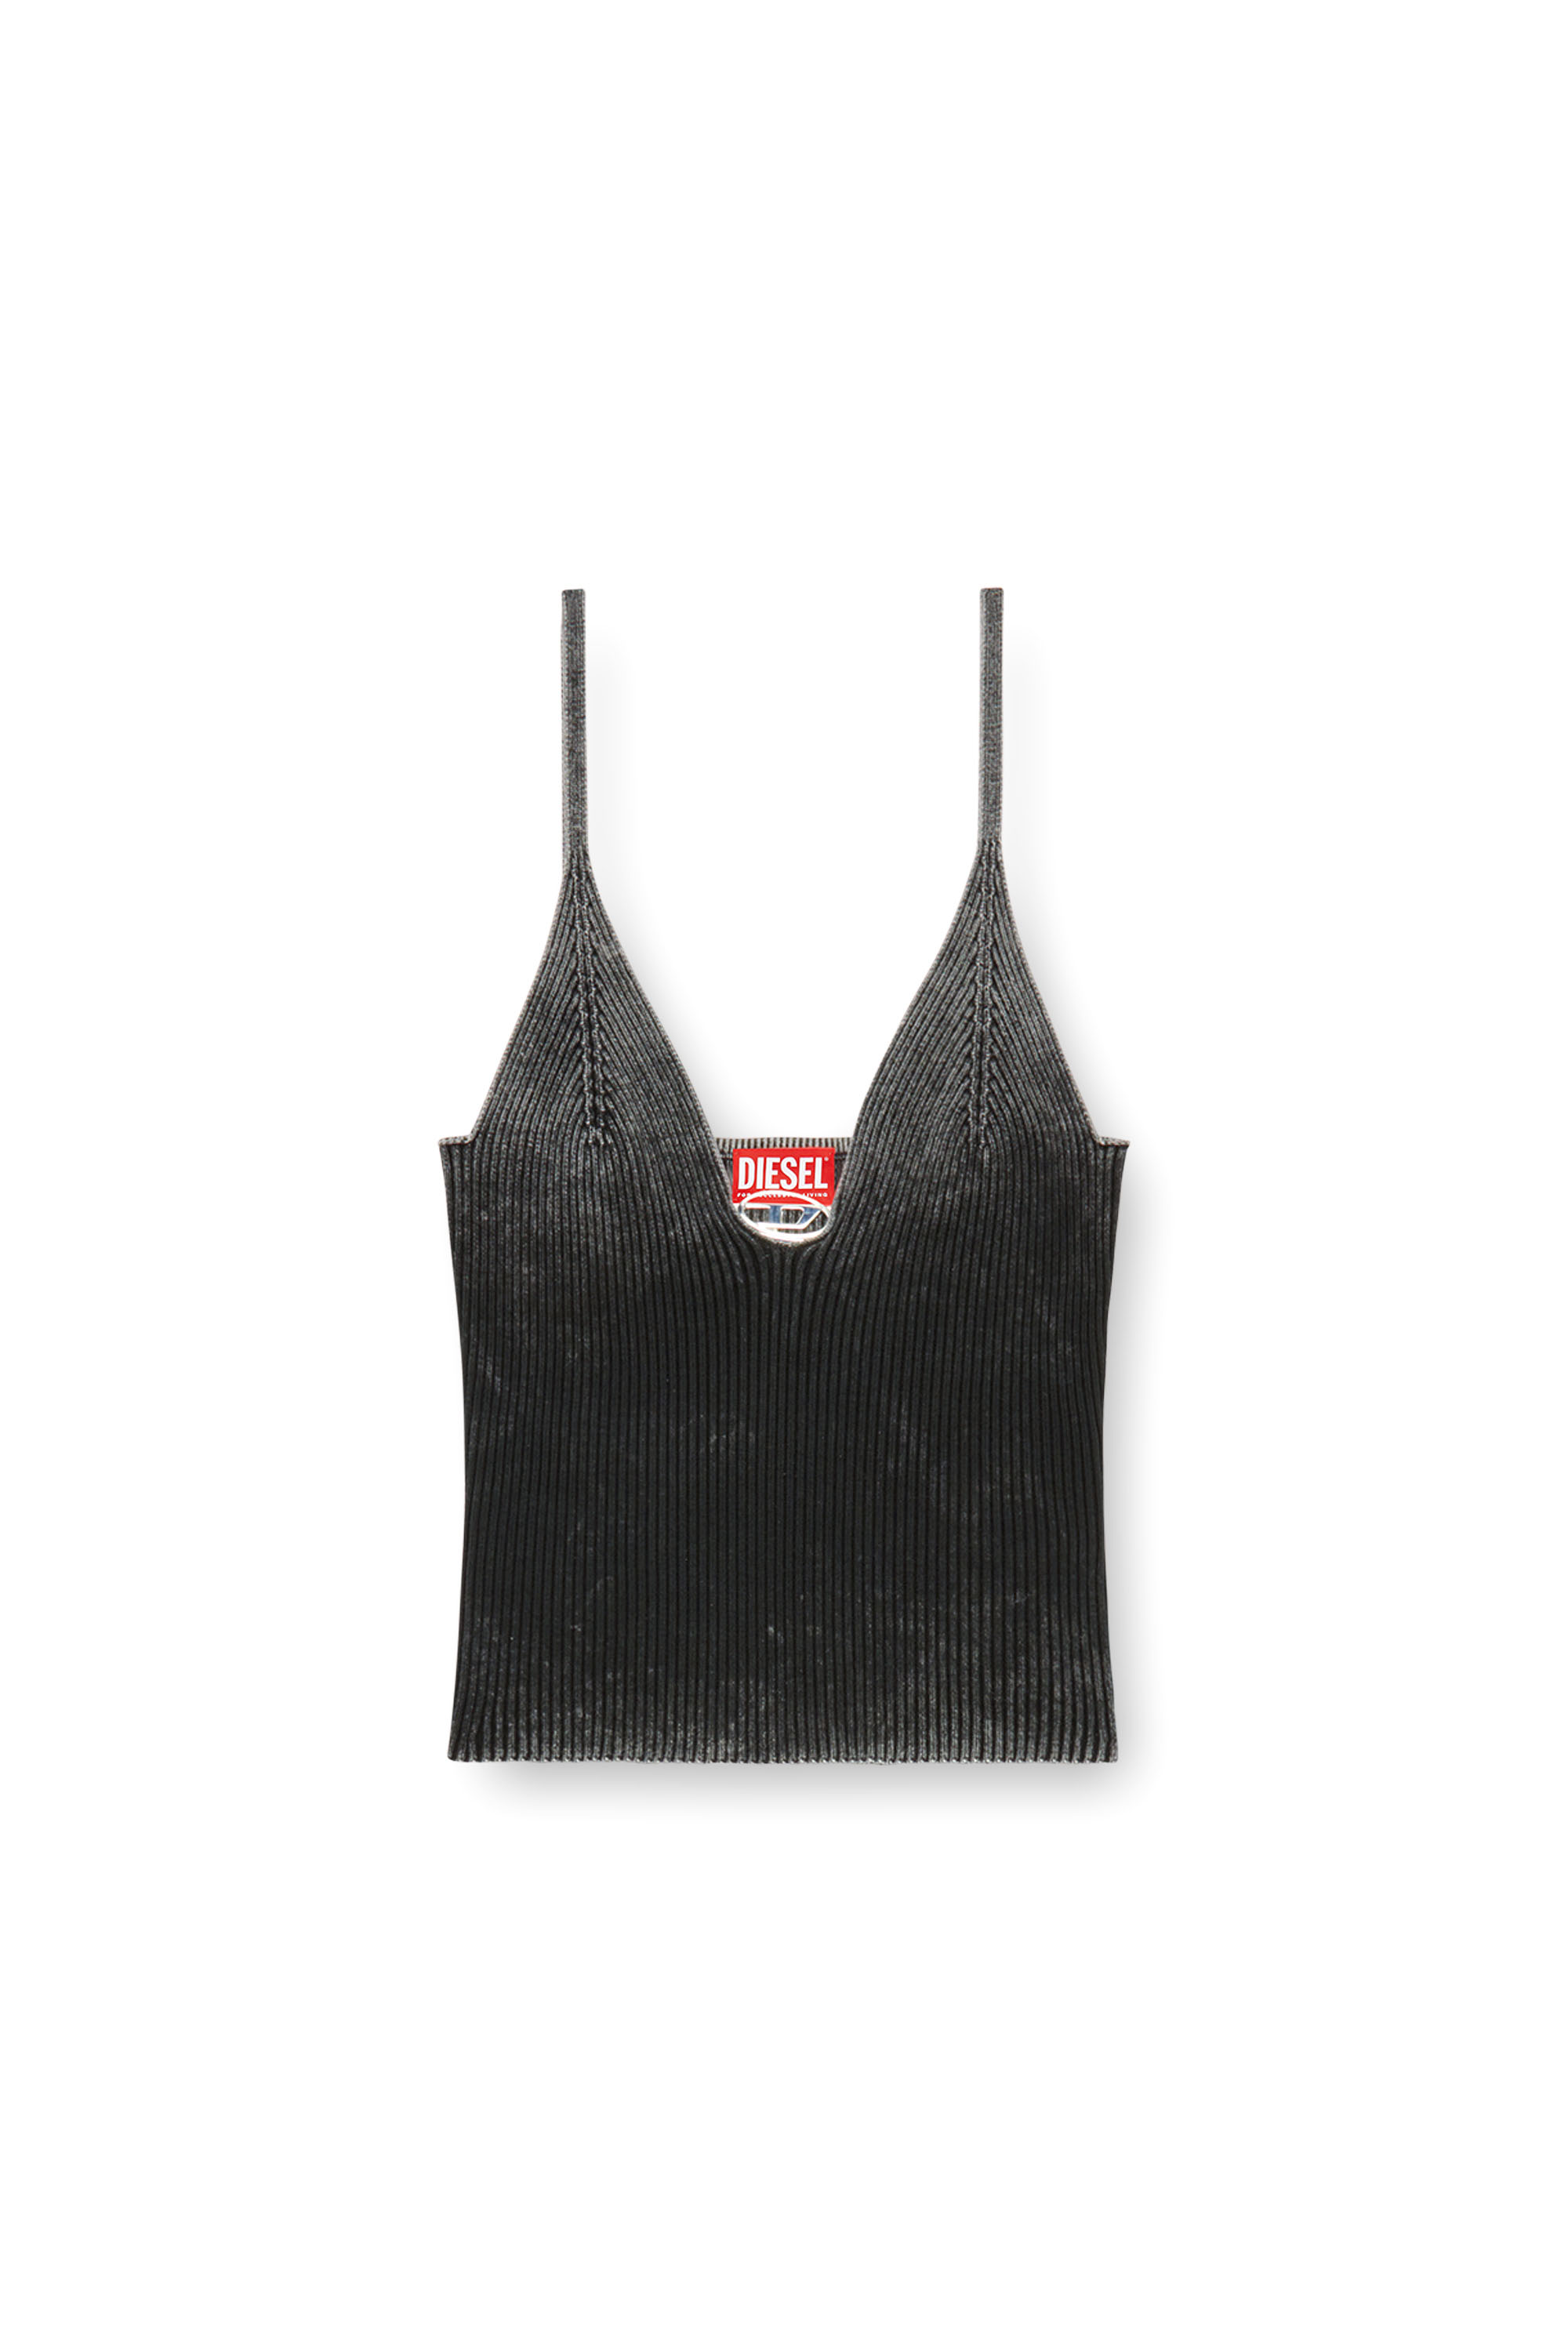 Diesel - M-LAILA, Female Camisole in faded ribbed knit in ブラック - Image 5